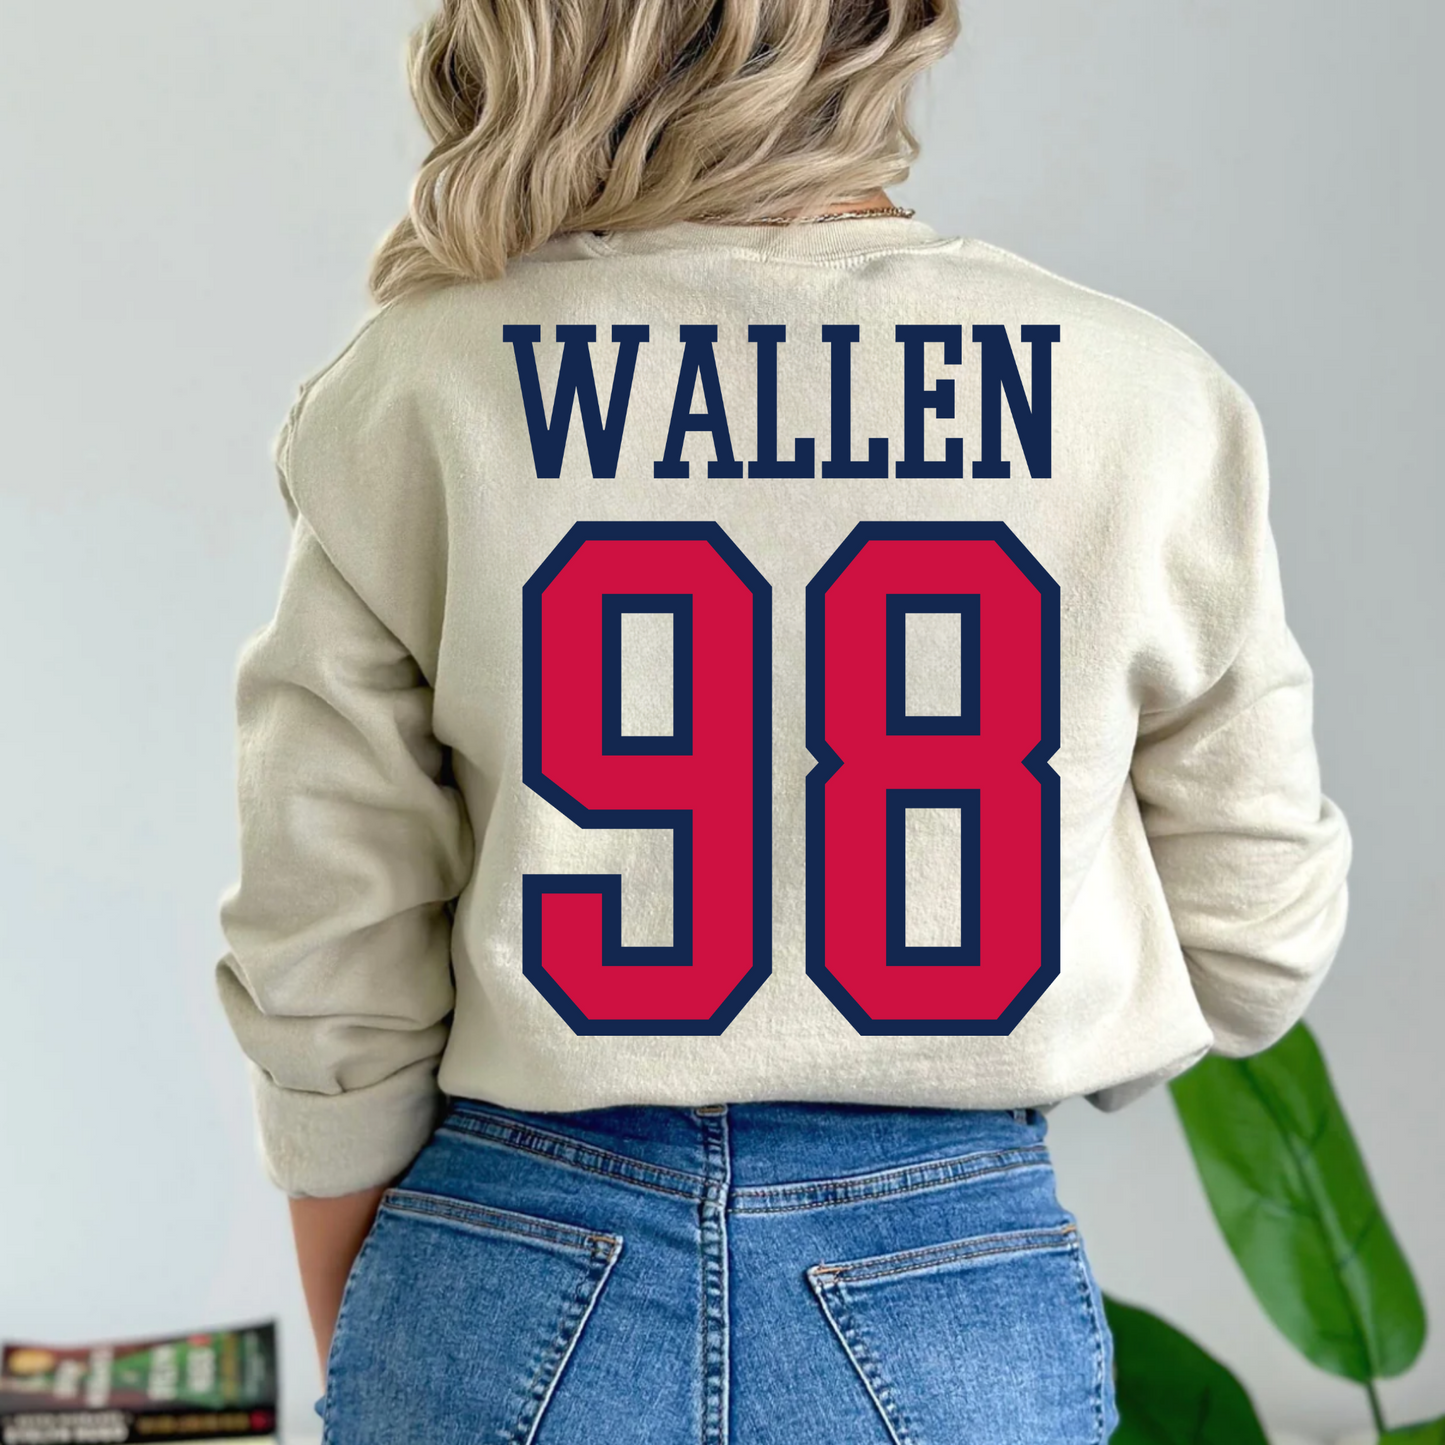 (shirt not included) Wallen 98 Braves includes Pocket - Matte Clear Film Transfer